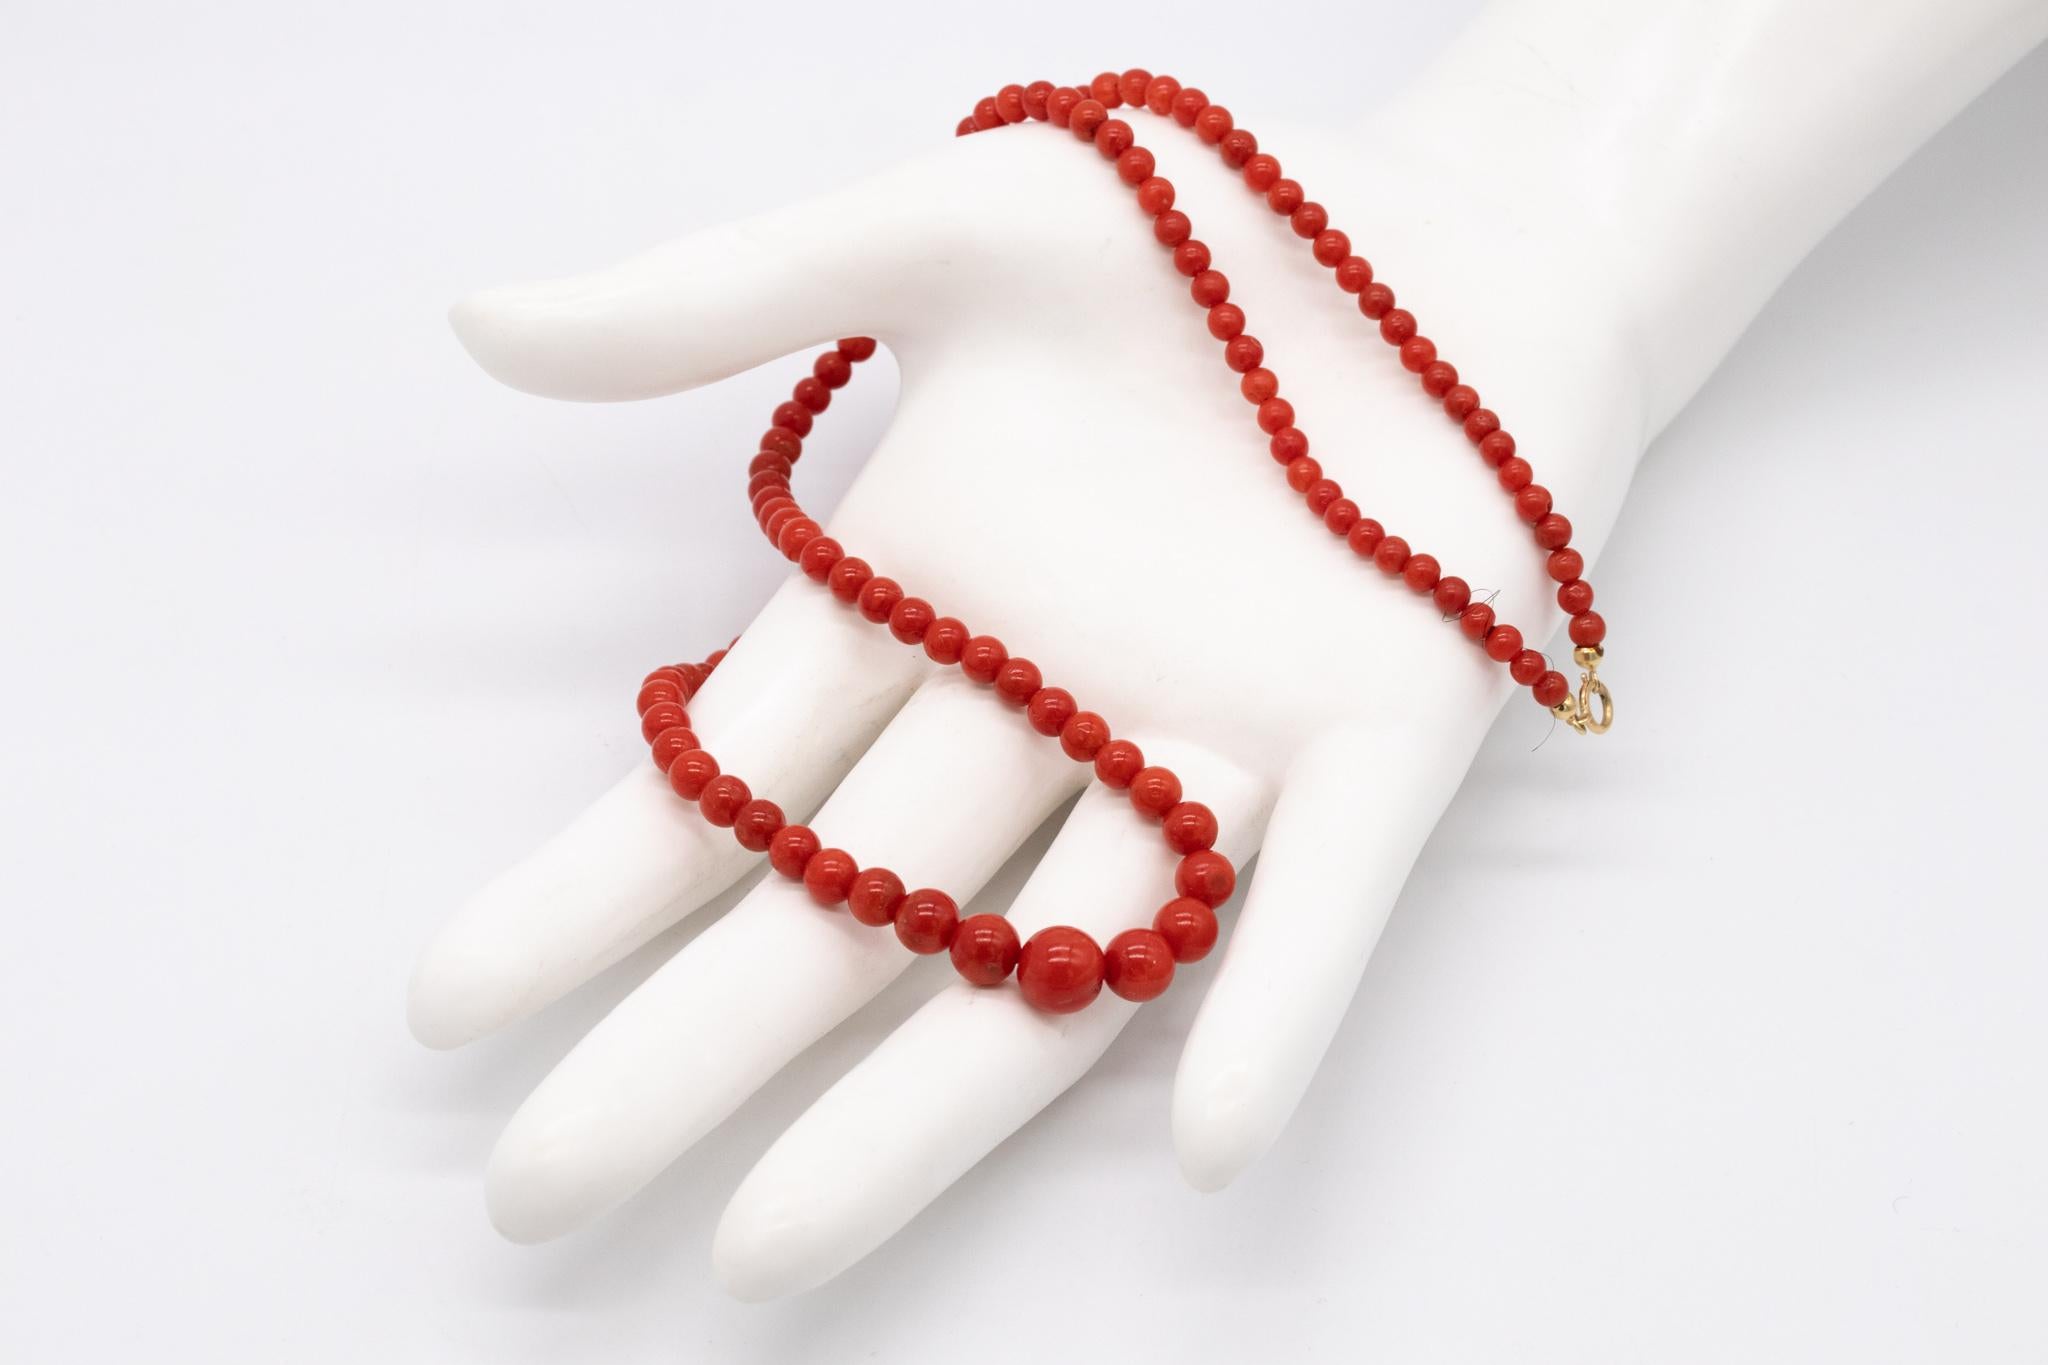 Neoclassical Italian 1960 Mid Century Necklace 18Kt Gold Graduated Red Sardinian Coral Beats